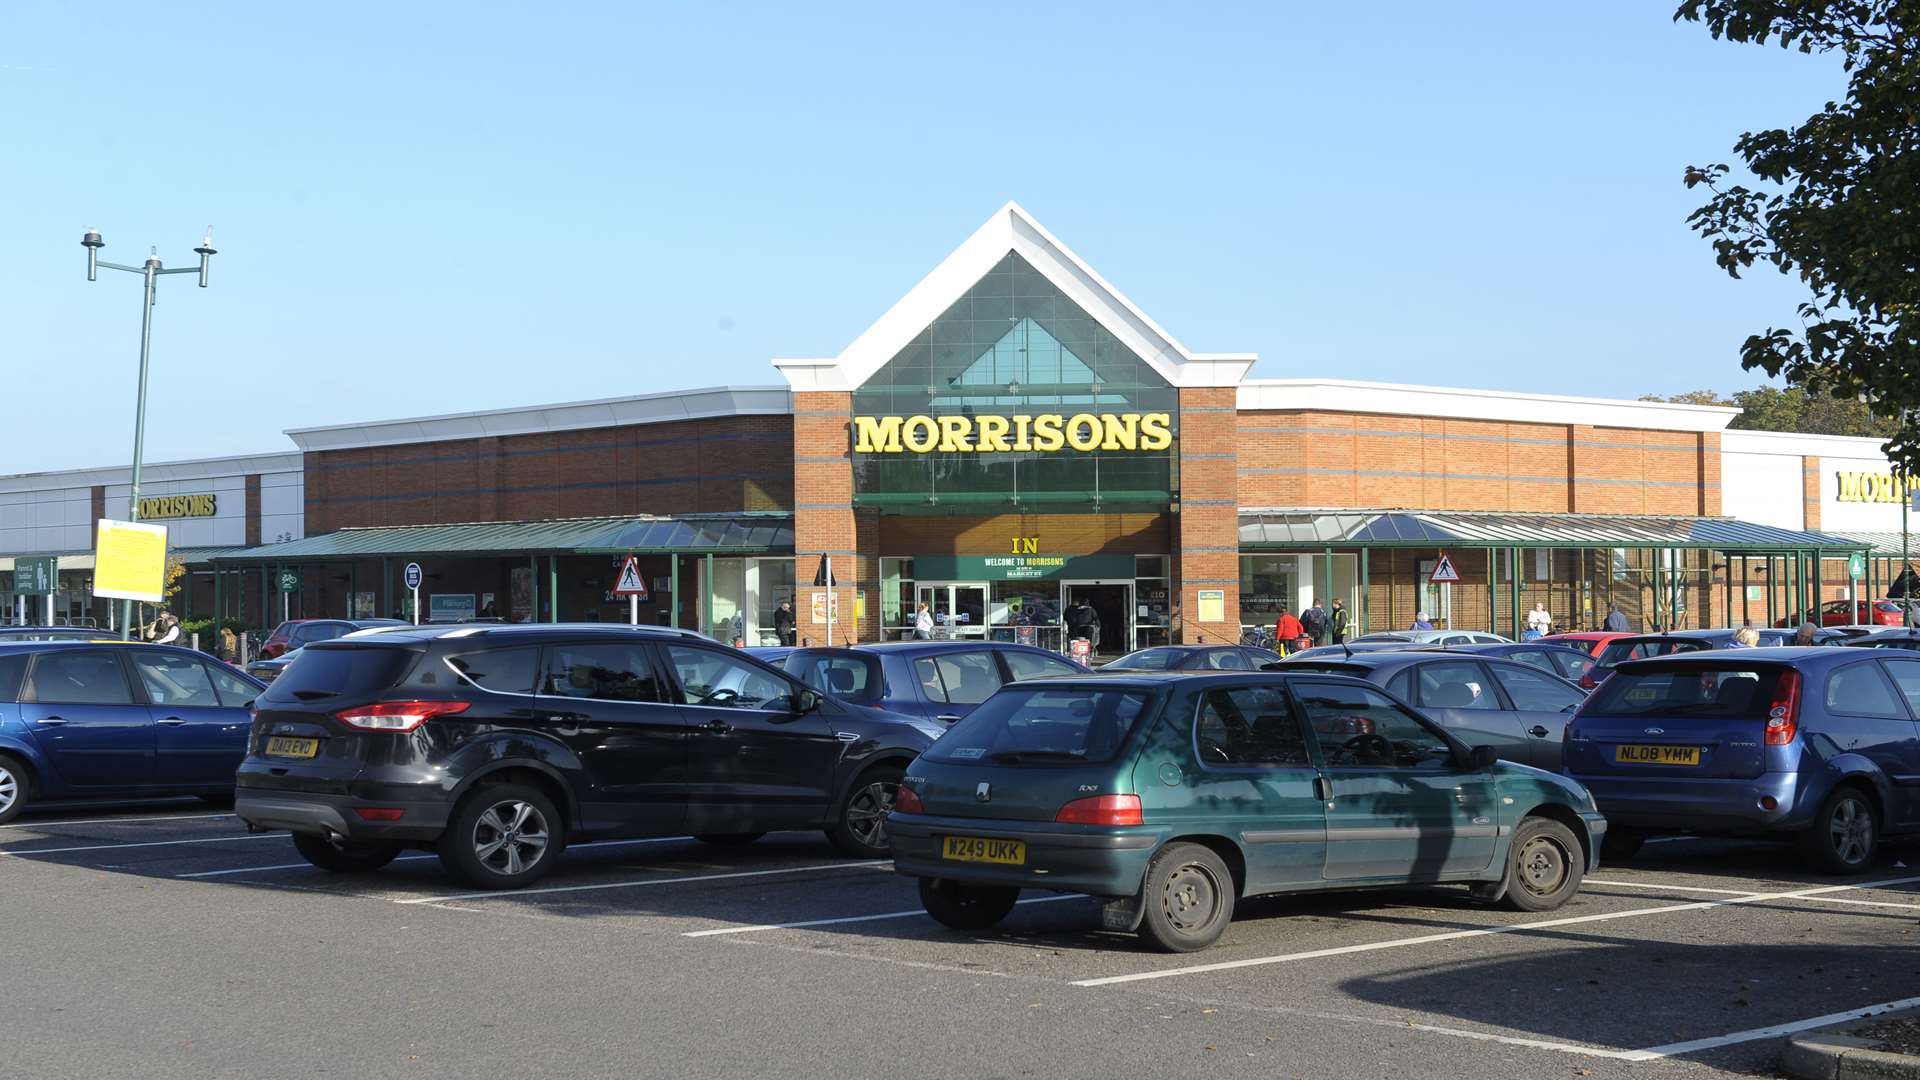 Morrisons supermarket where the distraction thefts took place.